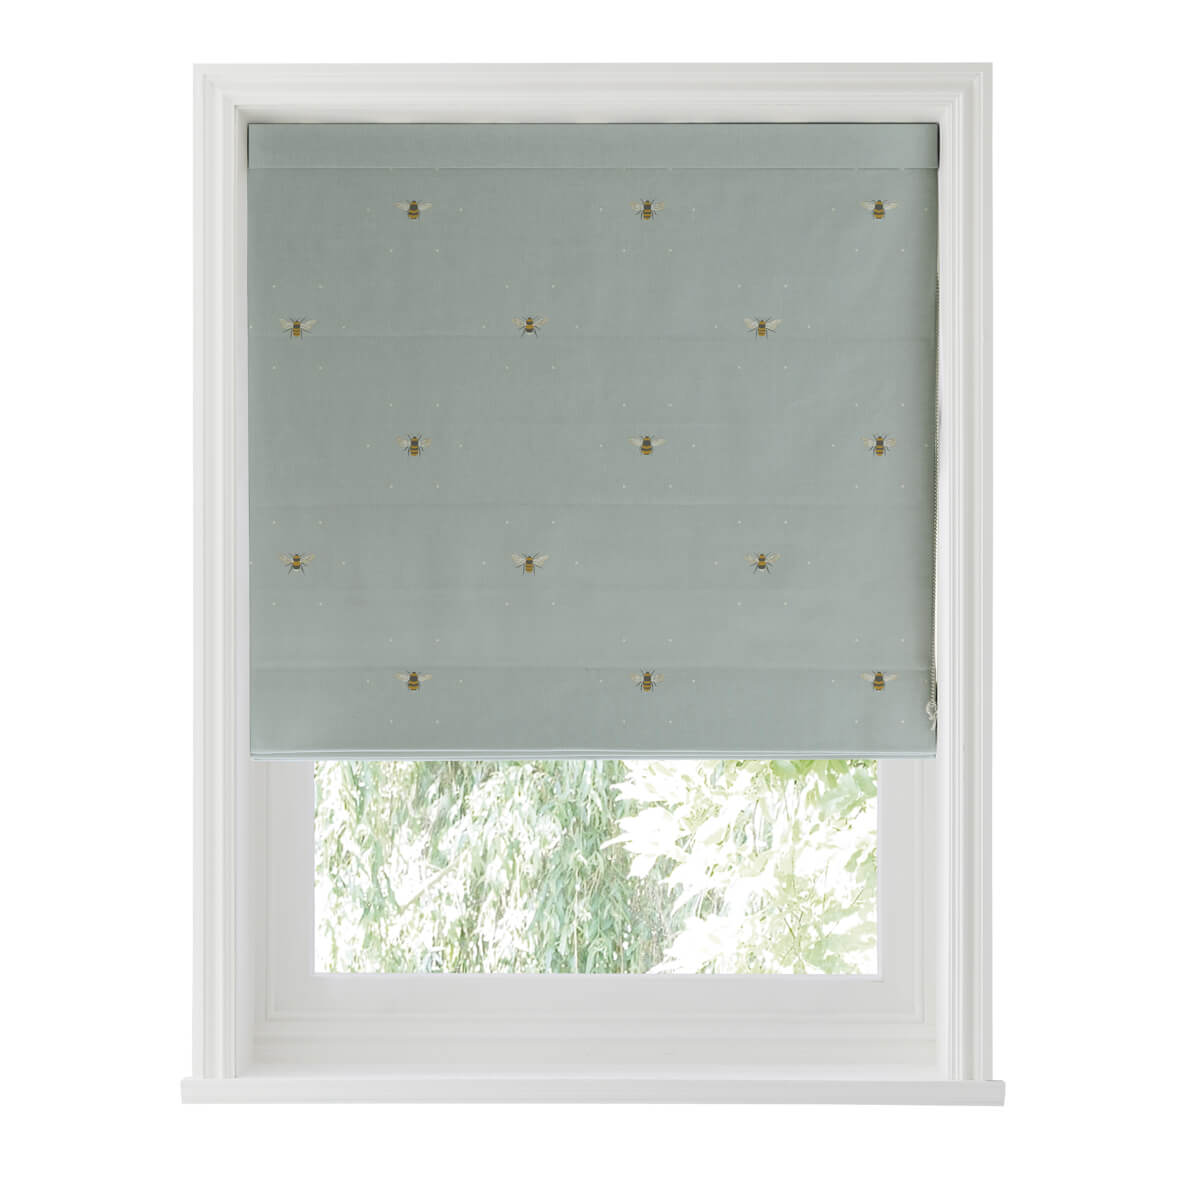 Bees Sky Made to Measure Roman Blind